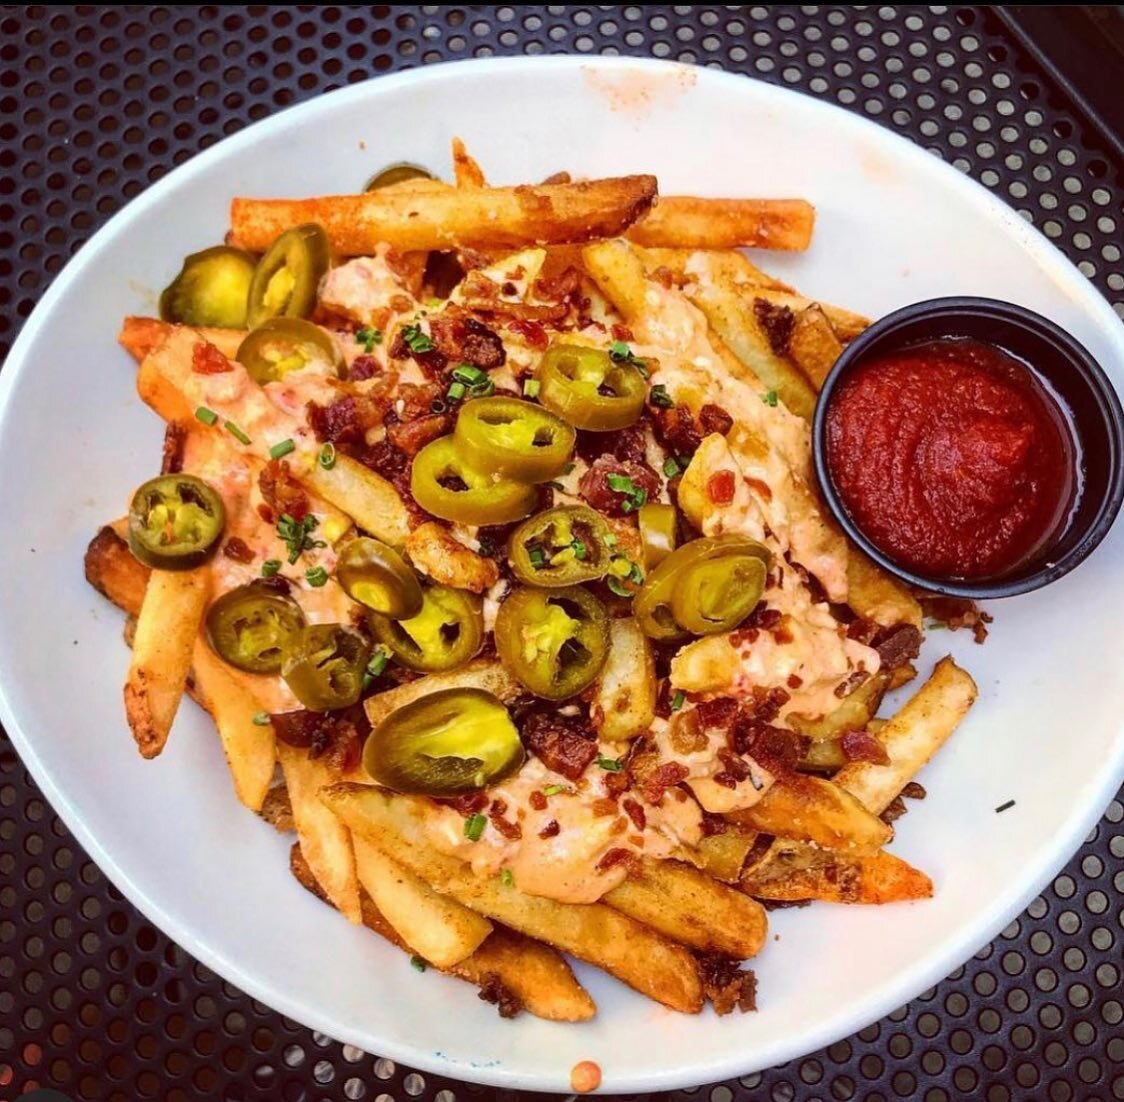 Famous fries, drizzled with Pimento cheese, and topped with jalape&ntilde;os and bacon. 
&bull;
&bull;
Dreams do come true. 
&bull;
&bull;

#secretsandwichsociety #shhhrva 🤫#shhhwv #rva #rvadine  #food #sandwichshop #craftbeer #craftcocktail #burger